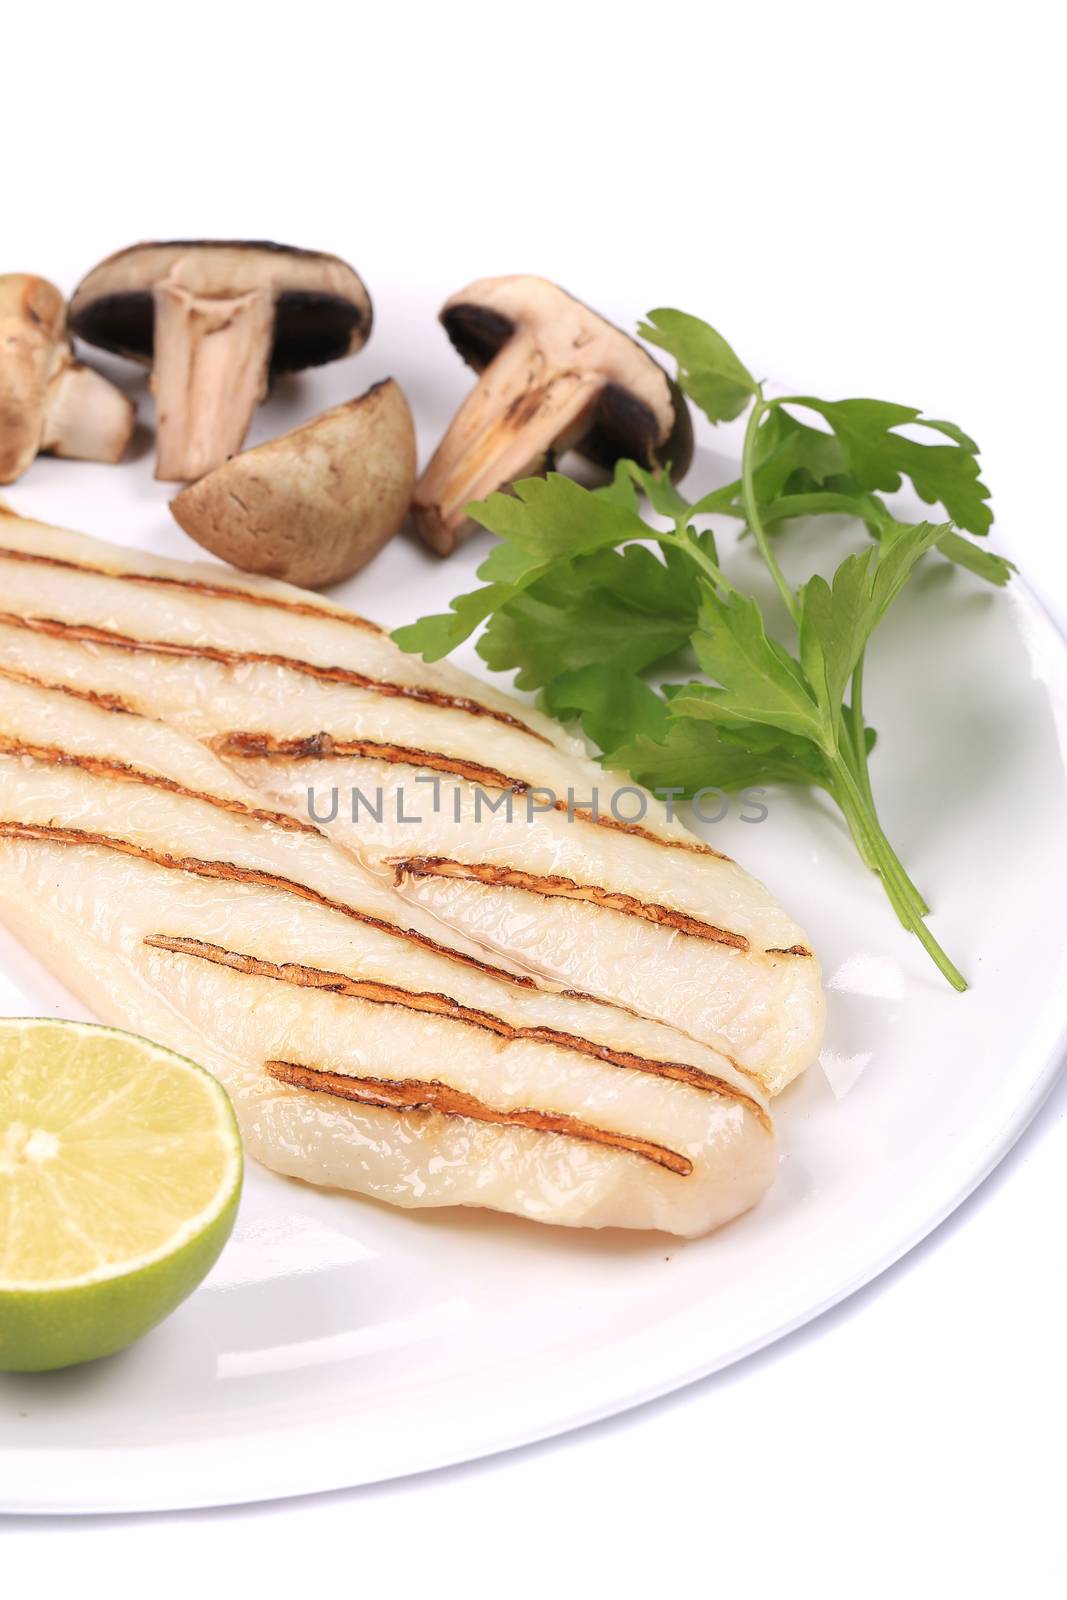 Grilled fish fillet with mushrooms. Isolated on a white background.